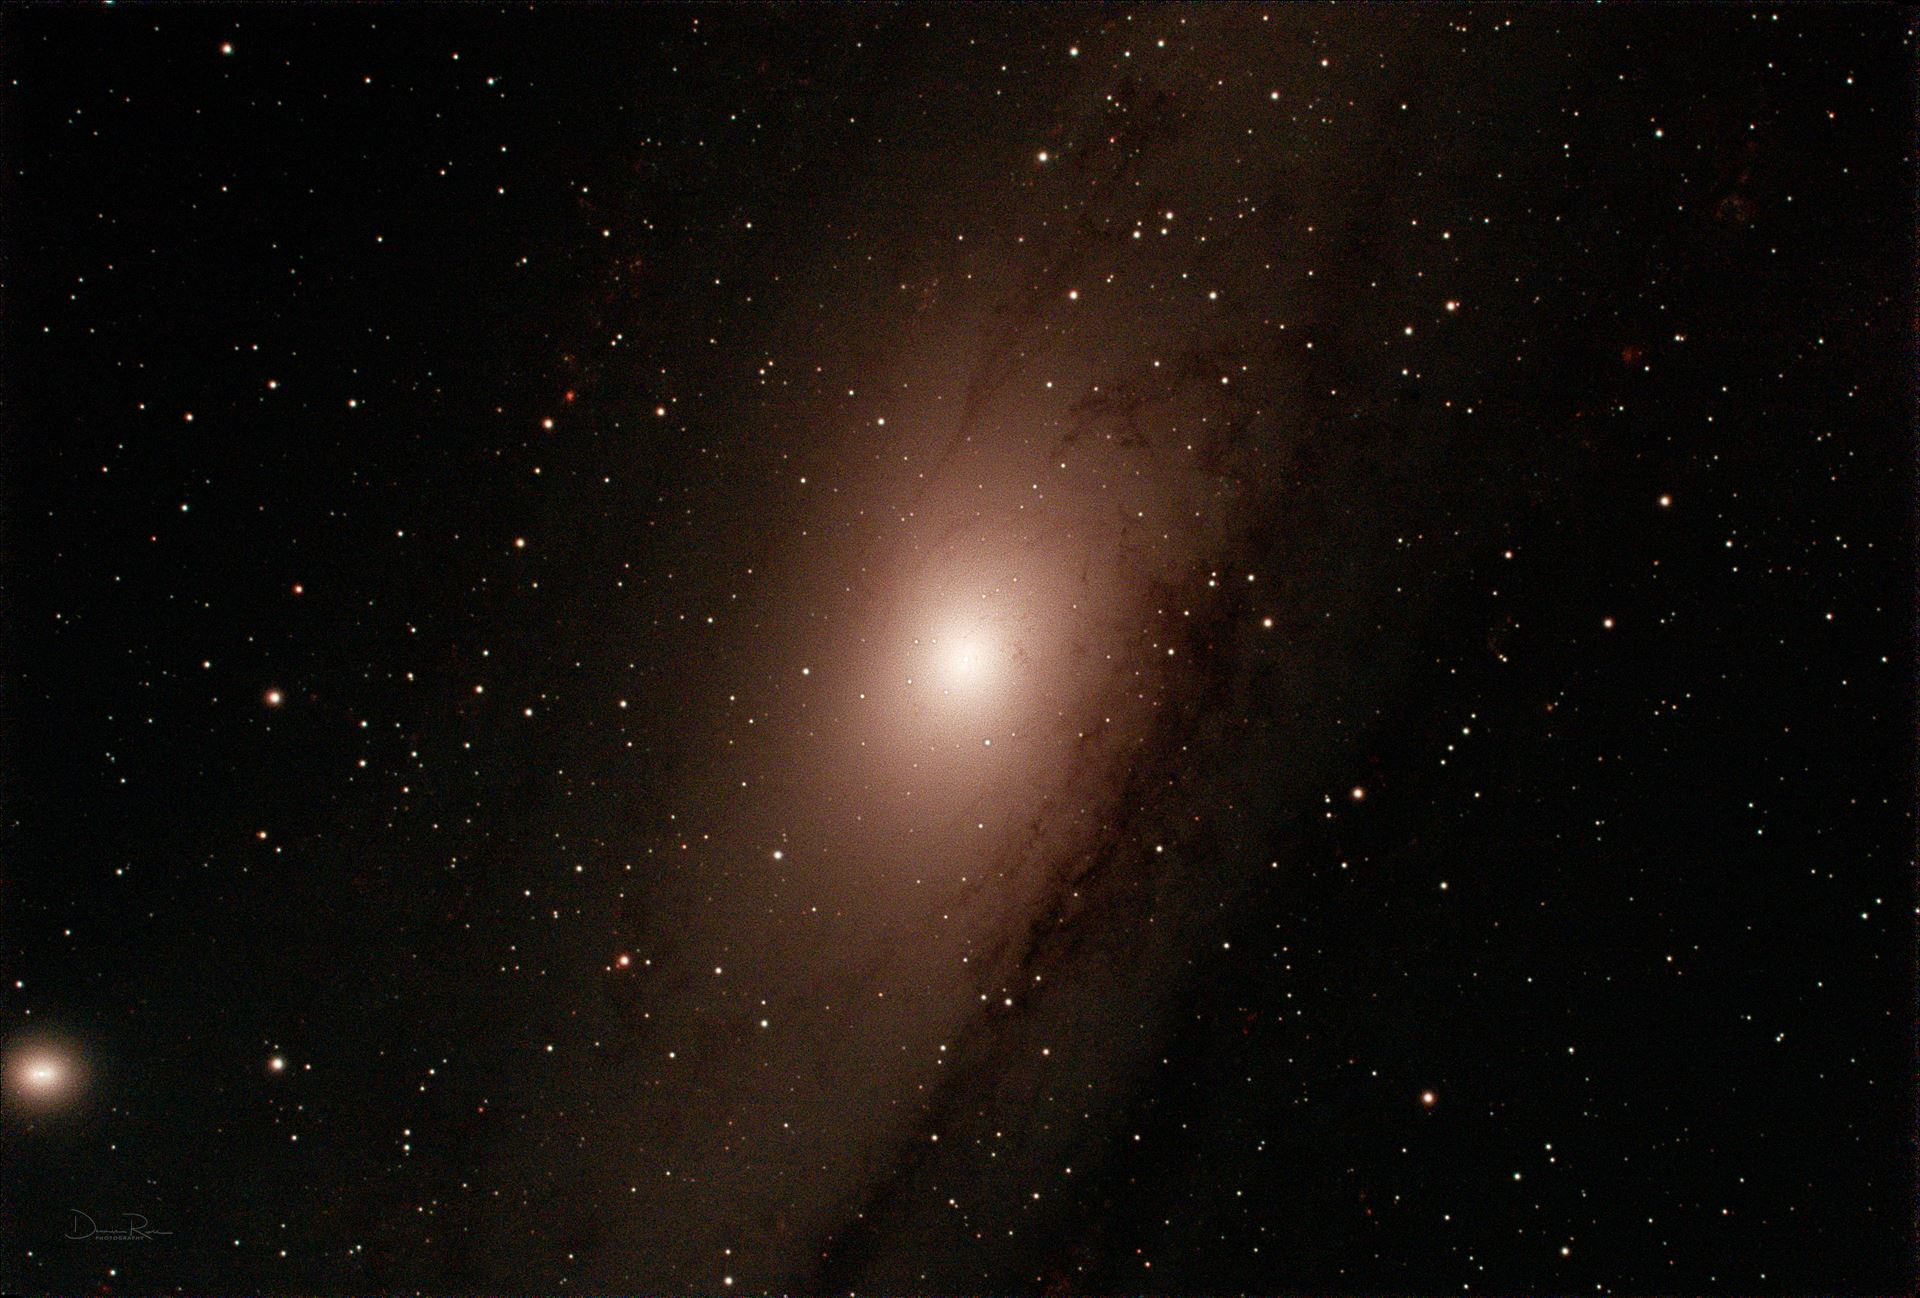 M31_Andromeda_Celstron_8_Edge_HD_.7_reducer-RGB-session_1-St.jpg  by Dennis Rose